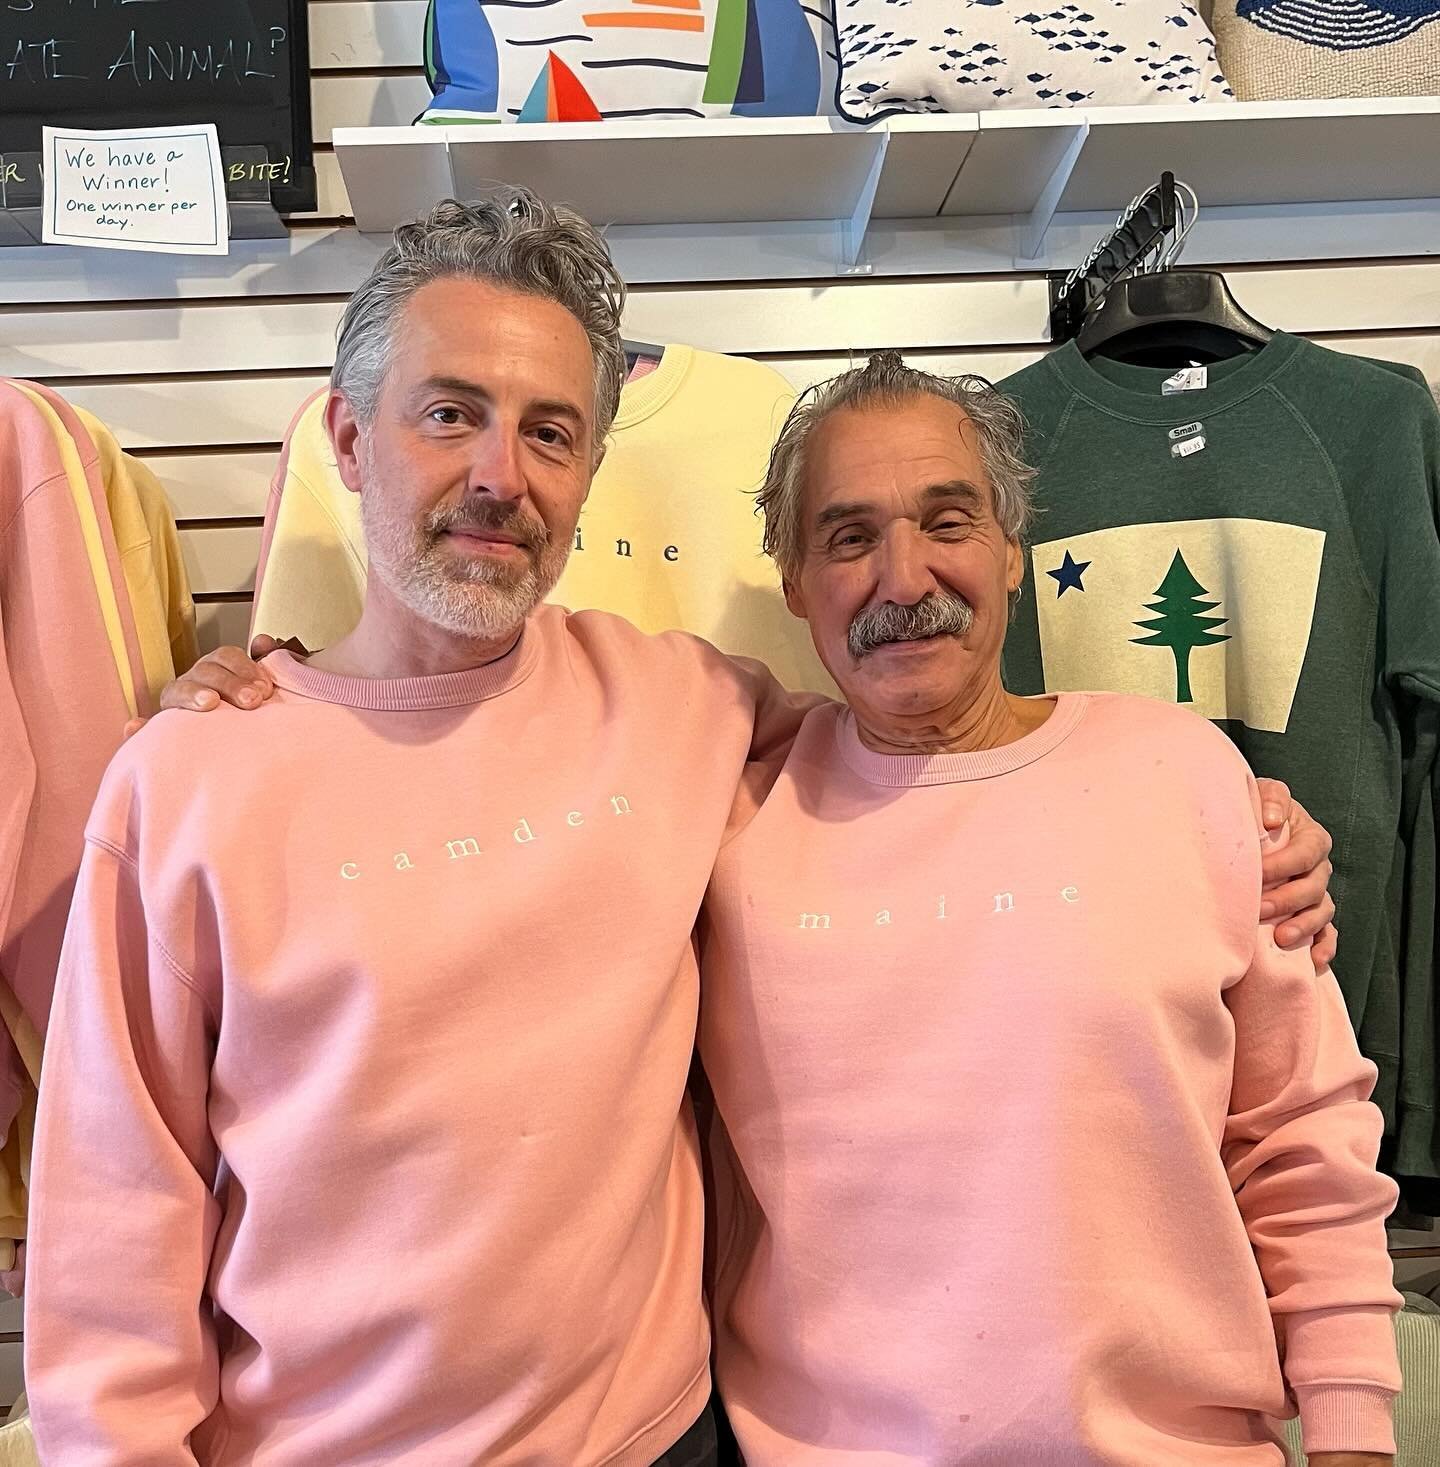 Men in Pink! 

Show your love for Camden and for Maine and for Camden, Maine with our cozy sweatshirts in pink and butter! Opening day is SATURDAY!! 

We&rsquo;re almost ready! 

#camden #camdenmaine #sweatshirt #shopsmall #midcoastmaine